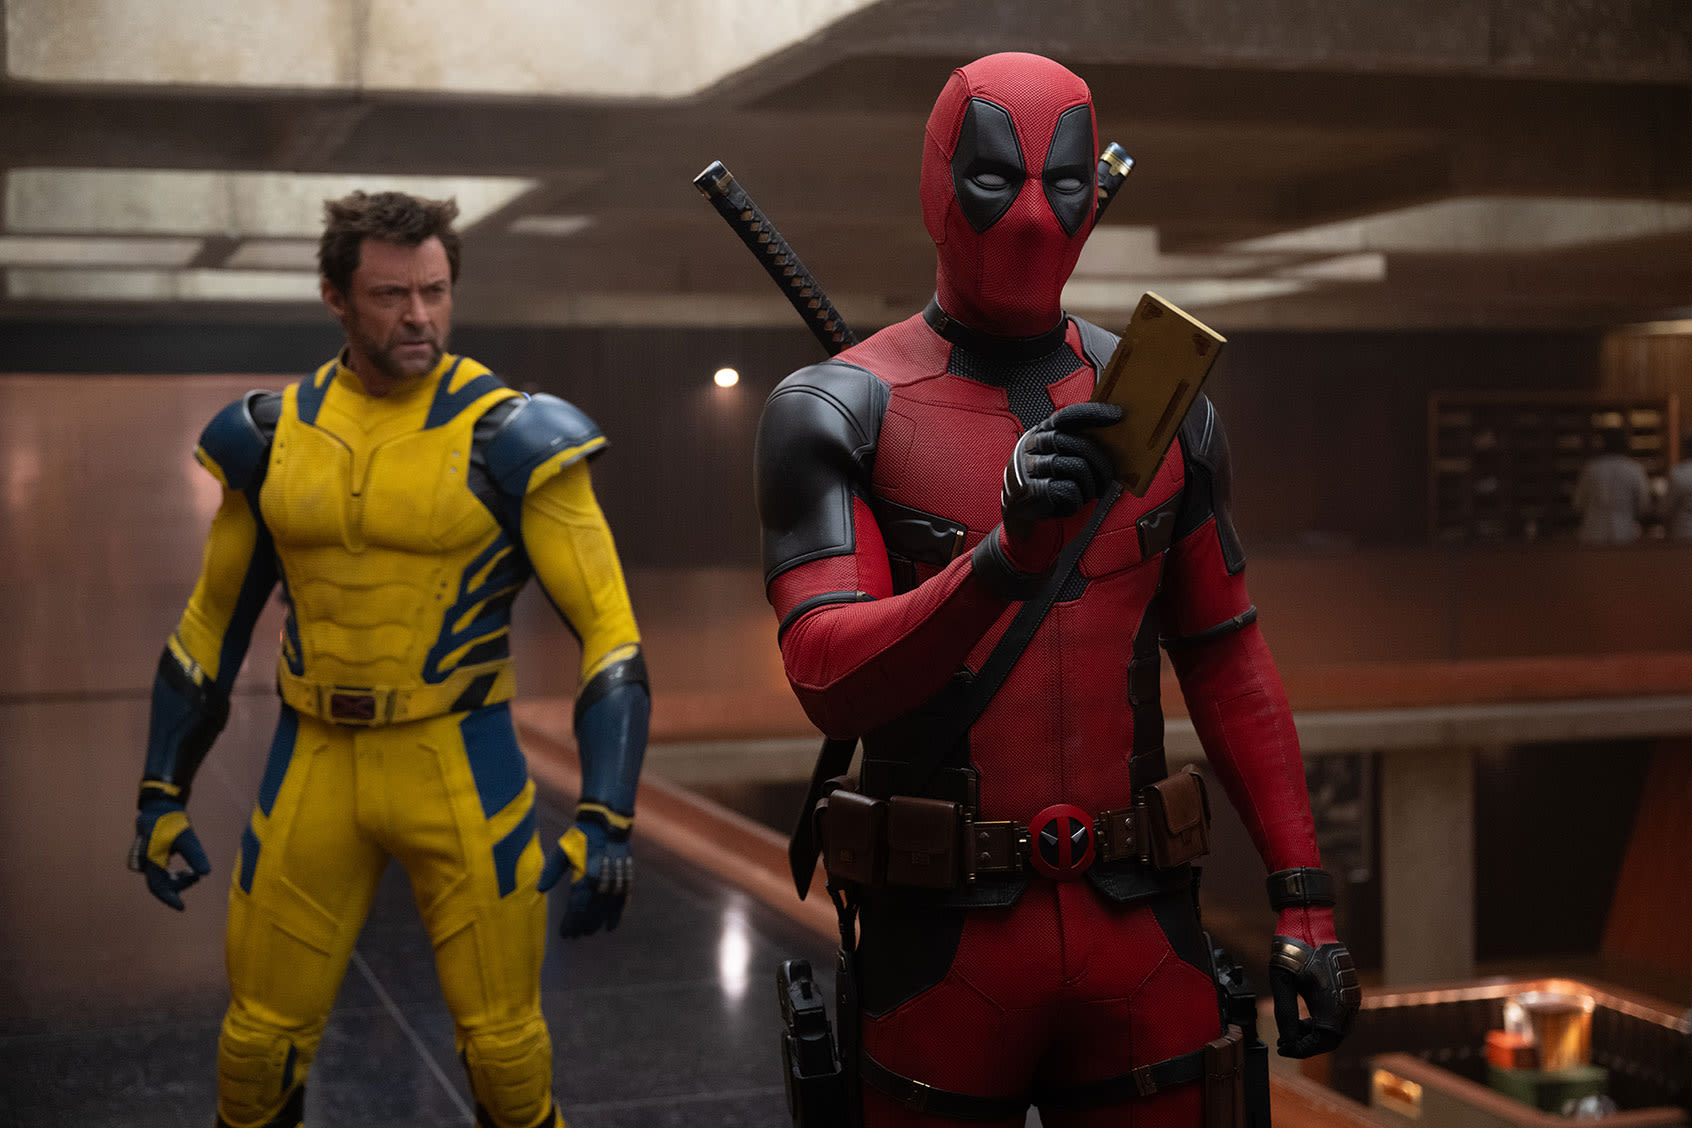 “Deadpool & Wolverine” shows how the Marvelization of movie storytelling loses the plot